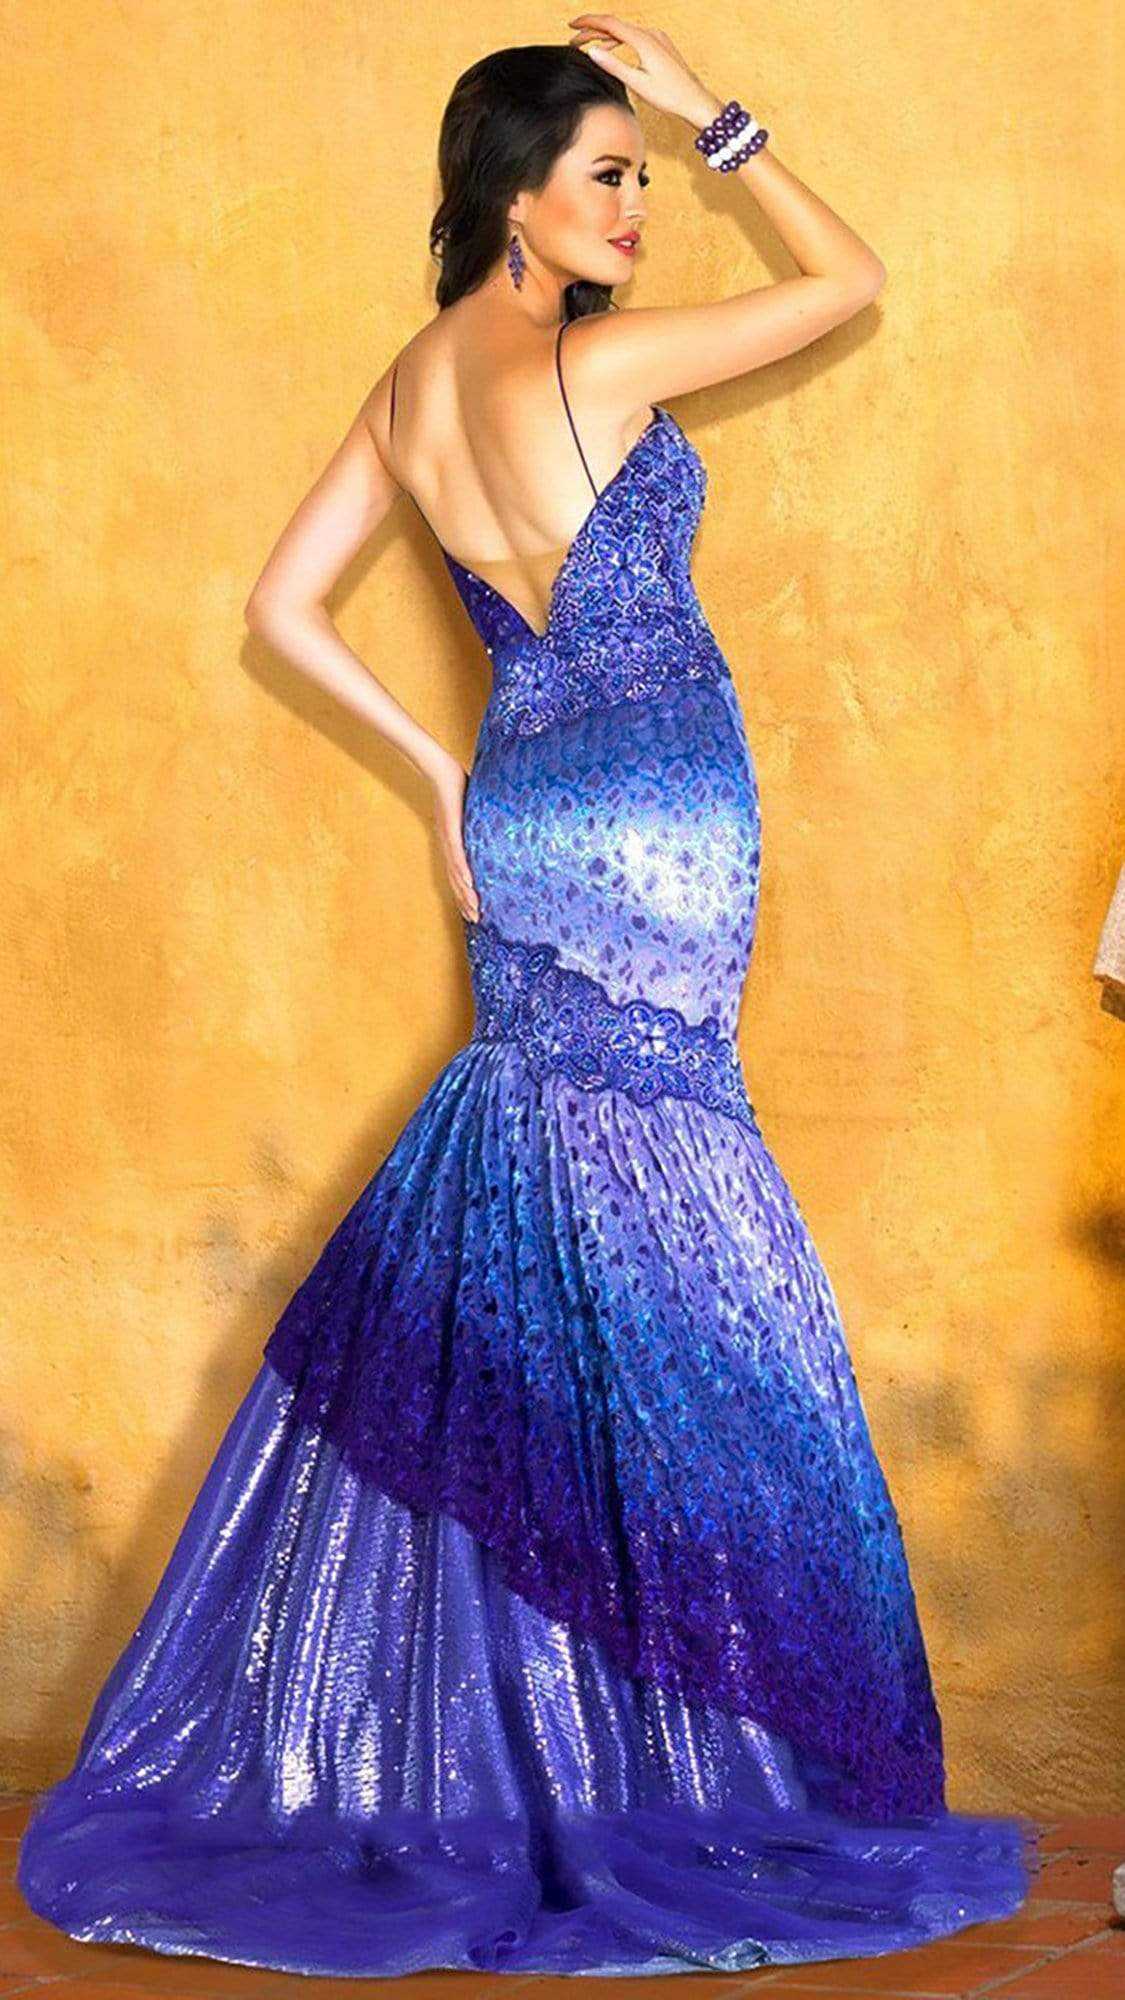 MNM Couture, MNM COUTURE - Sleeveless V Neck Lace Mermaid Gown KH068 - 1 pc Purple in Size 10 Available